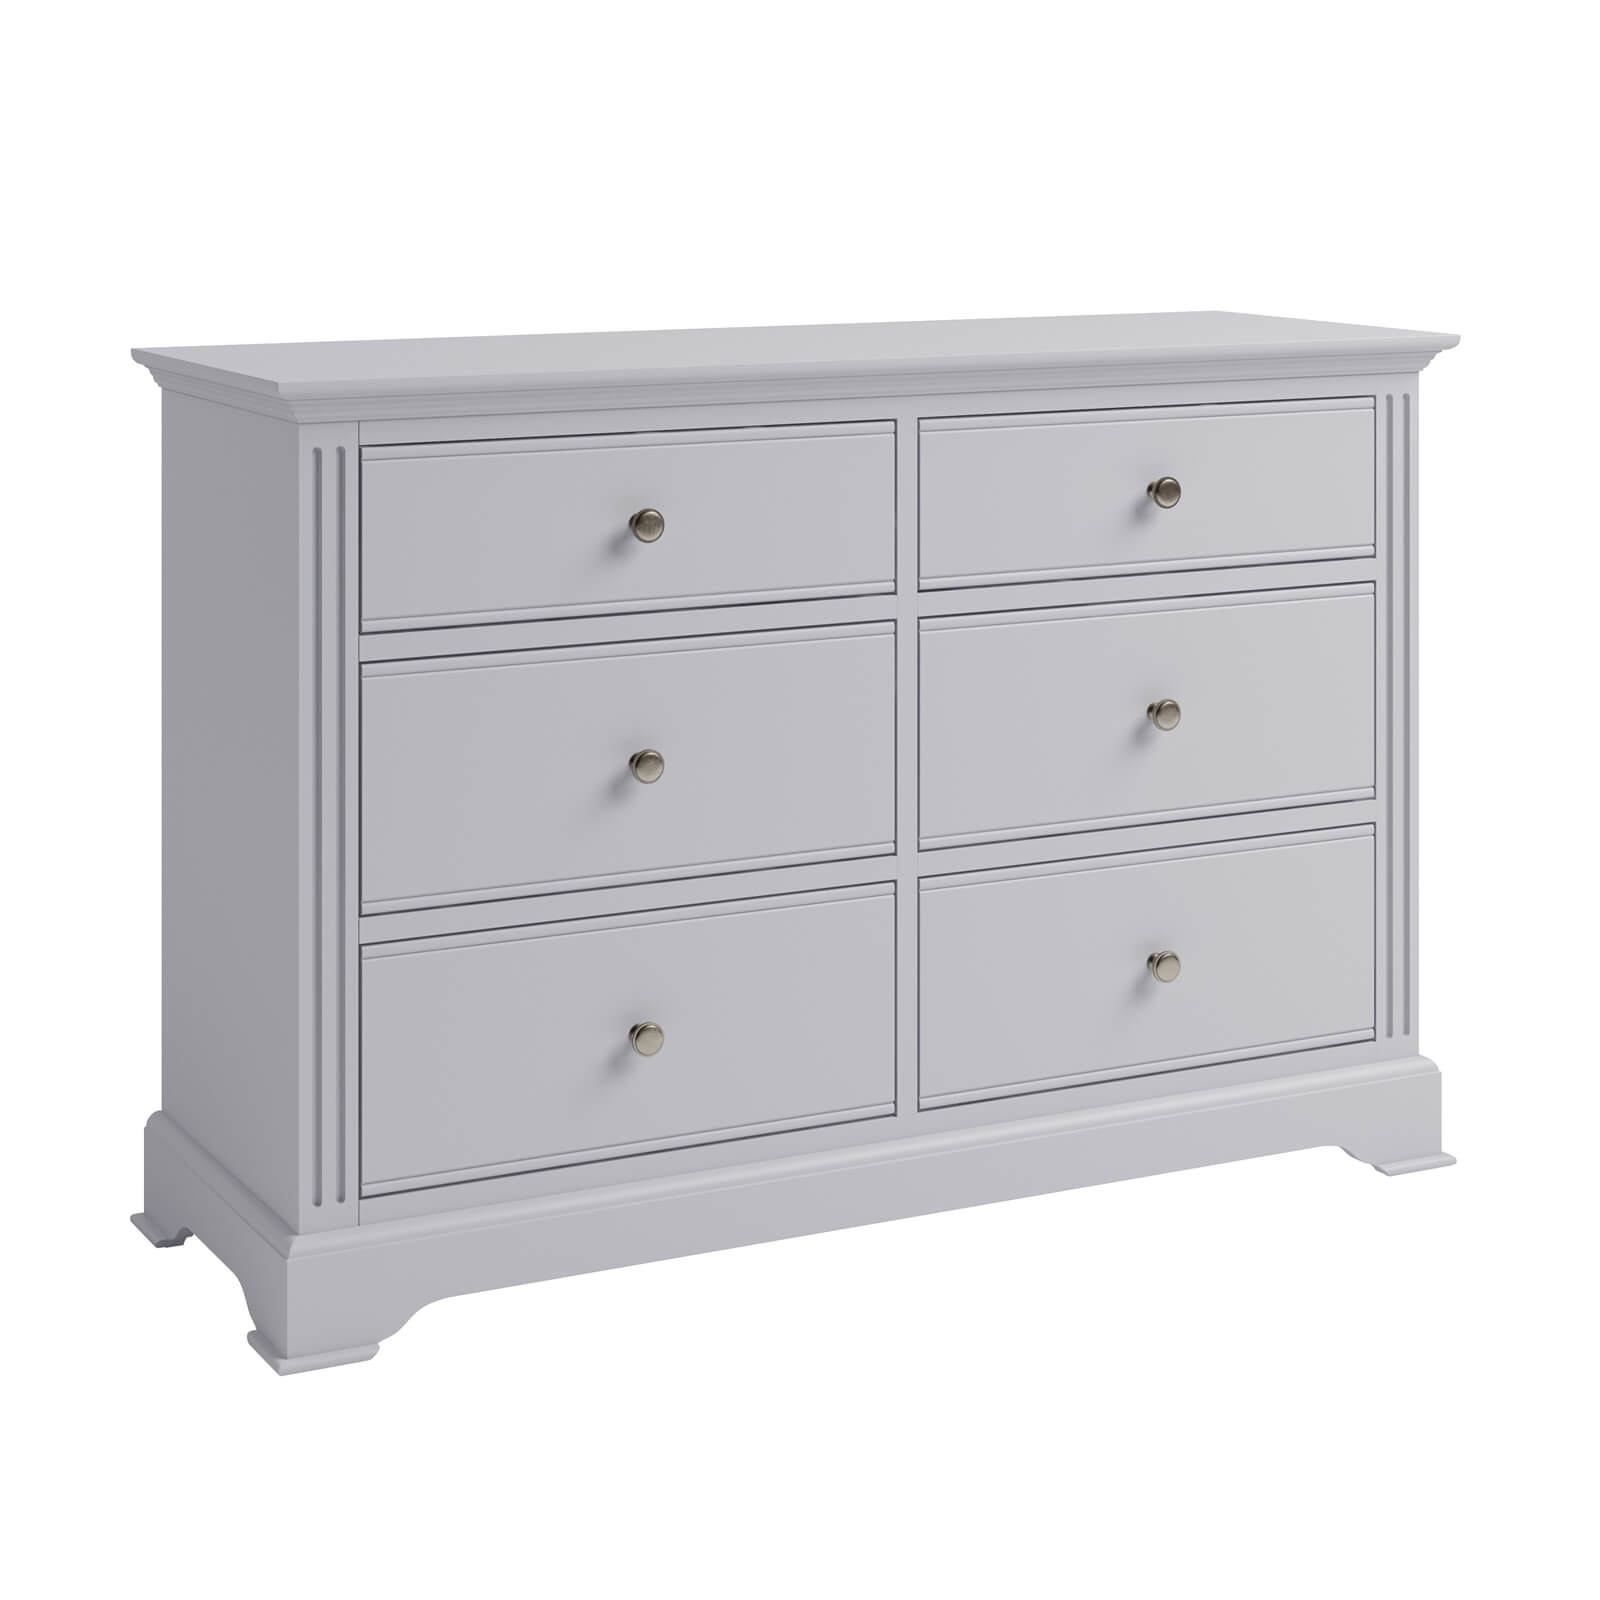 Camborne 6 Drawer Chest of Drawers - Grey